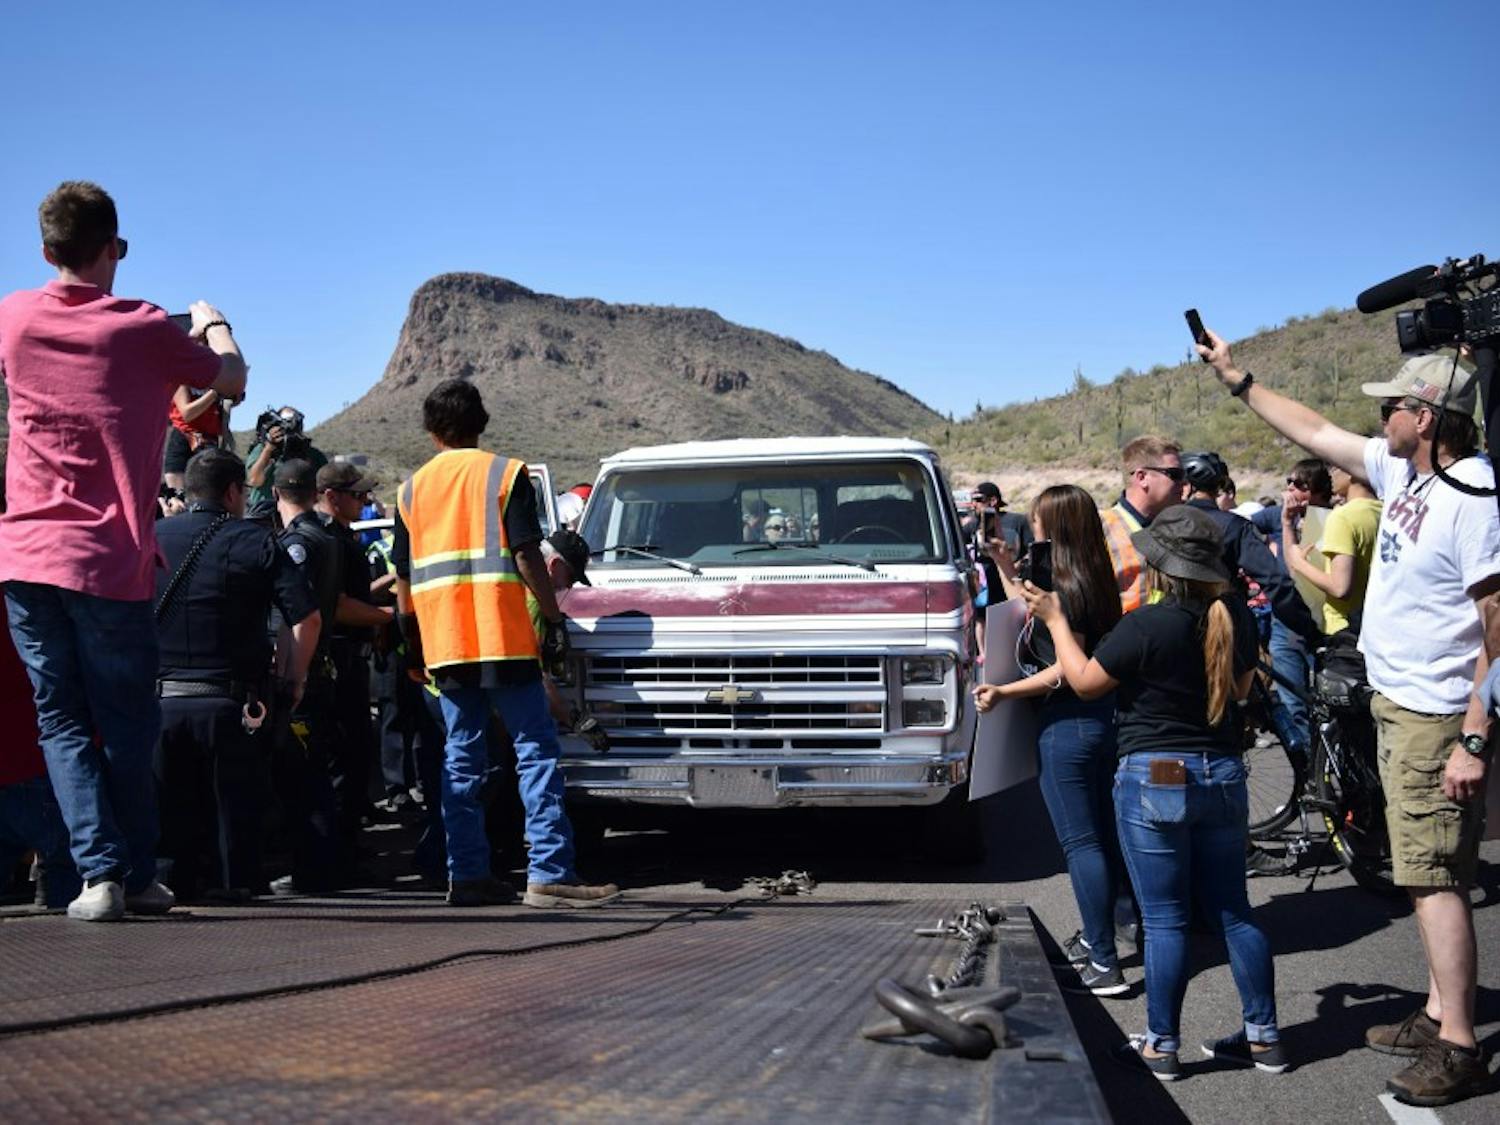 A car blocking the route in protest to a Trump rally is towed on Saturday, March 19, 2016.